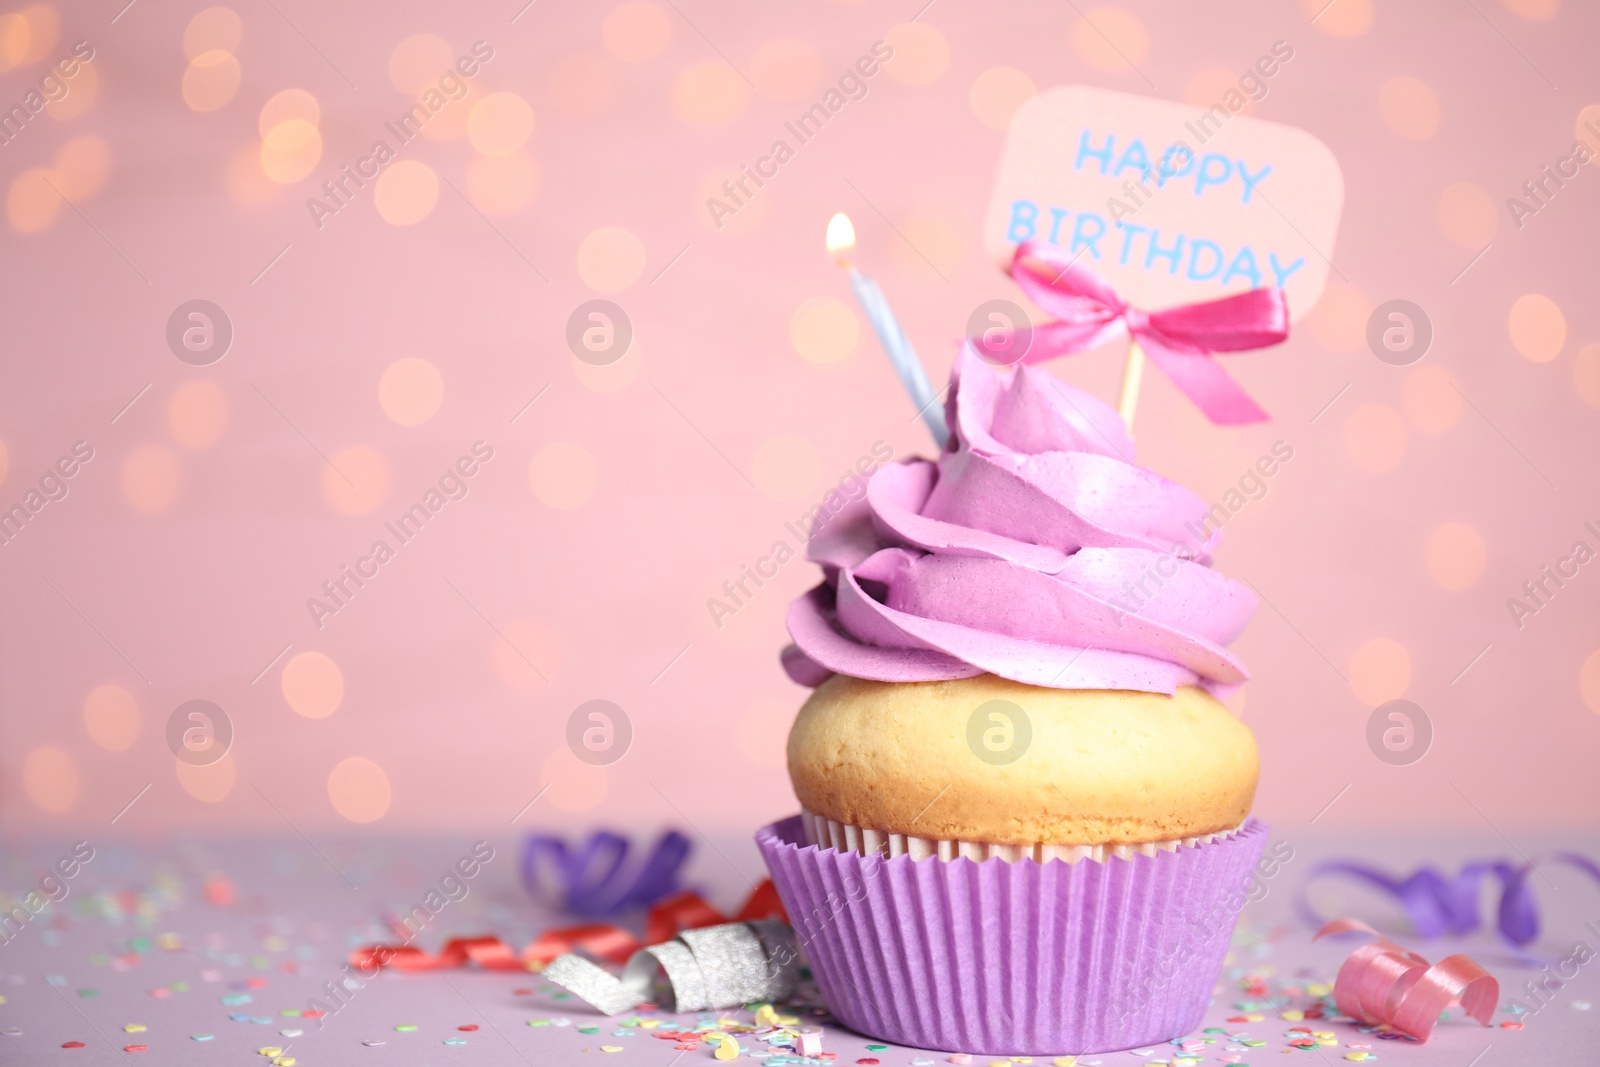 Photo of Beautiful birthday cupcake, streamers and confetti against pink background with blurred lights